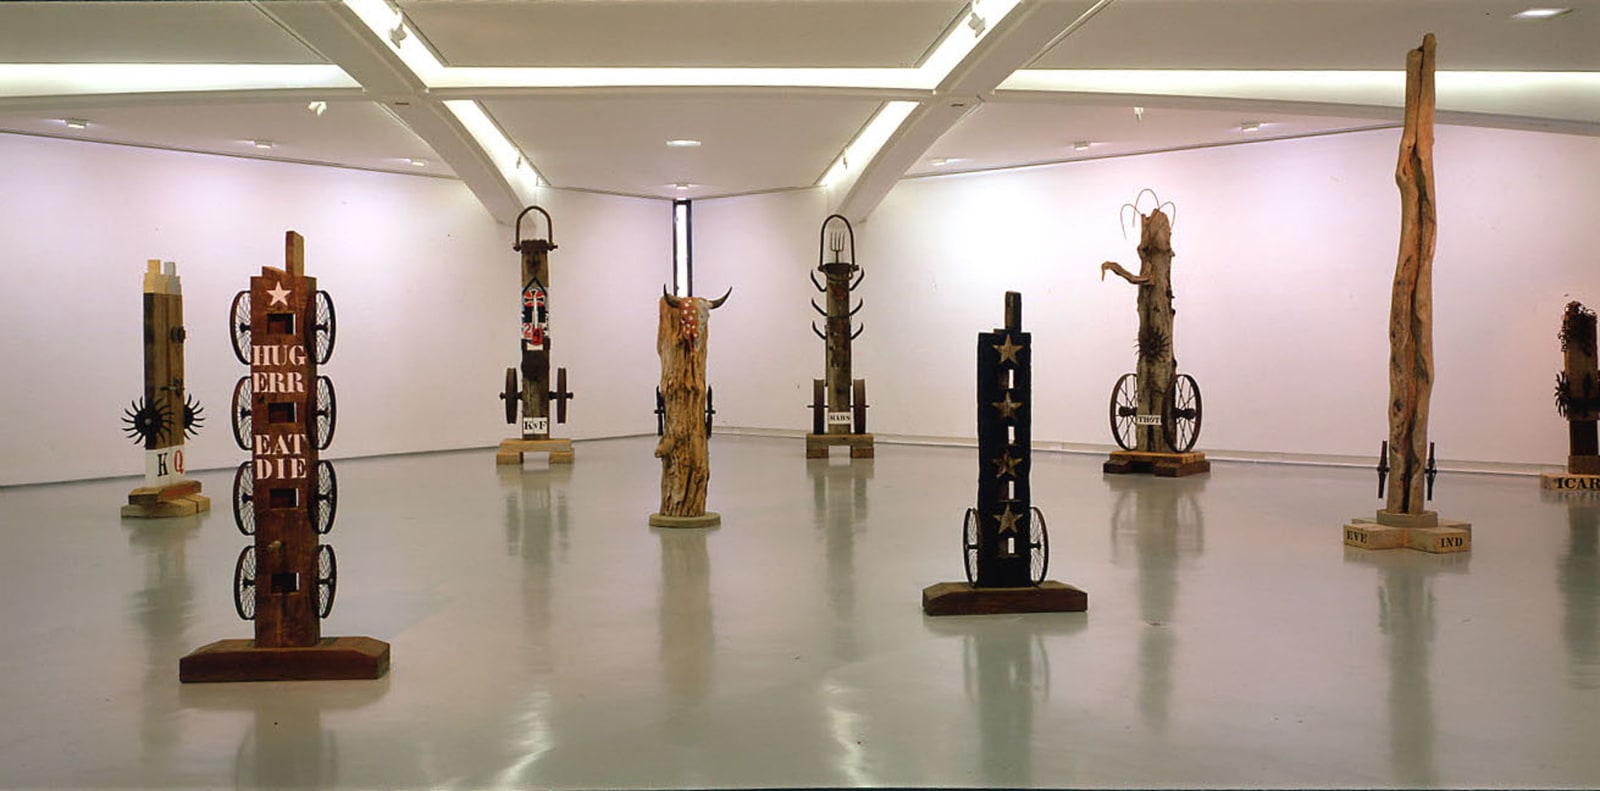 Installation view of the exhibition Robert Indiana: R&amp;eacute;trospective, 1958&amp;ndash;1998 at the Mus&amp;eacute;e d&amp;rsquo;Art Moderne et d&amp;rsquo;Art Contemporain in Nice, France; left to right: Monarchy (1981), The American Dream (1992), KvF (1991), USA (1996), Mars (1990), Four Star (1993), Thoth (1985), Eve (1997), and Icarus (1992)